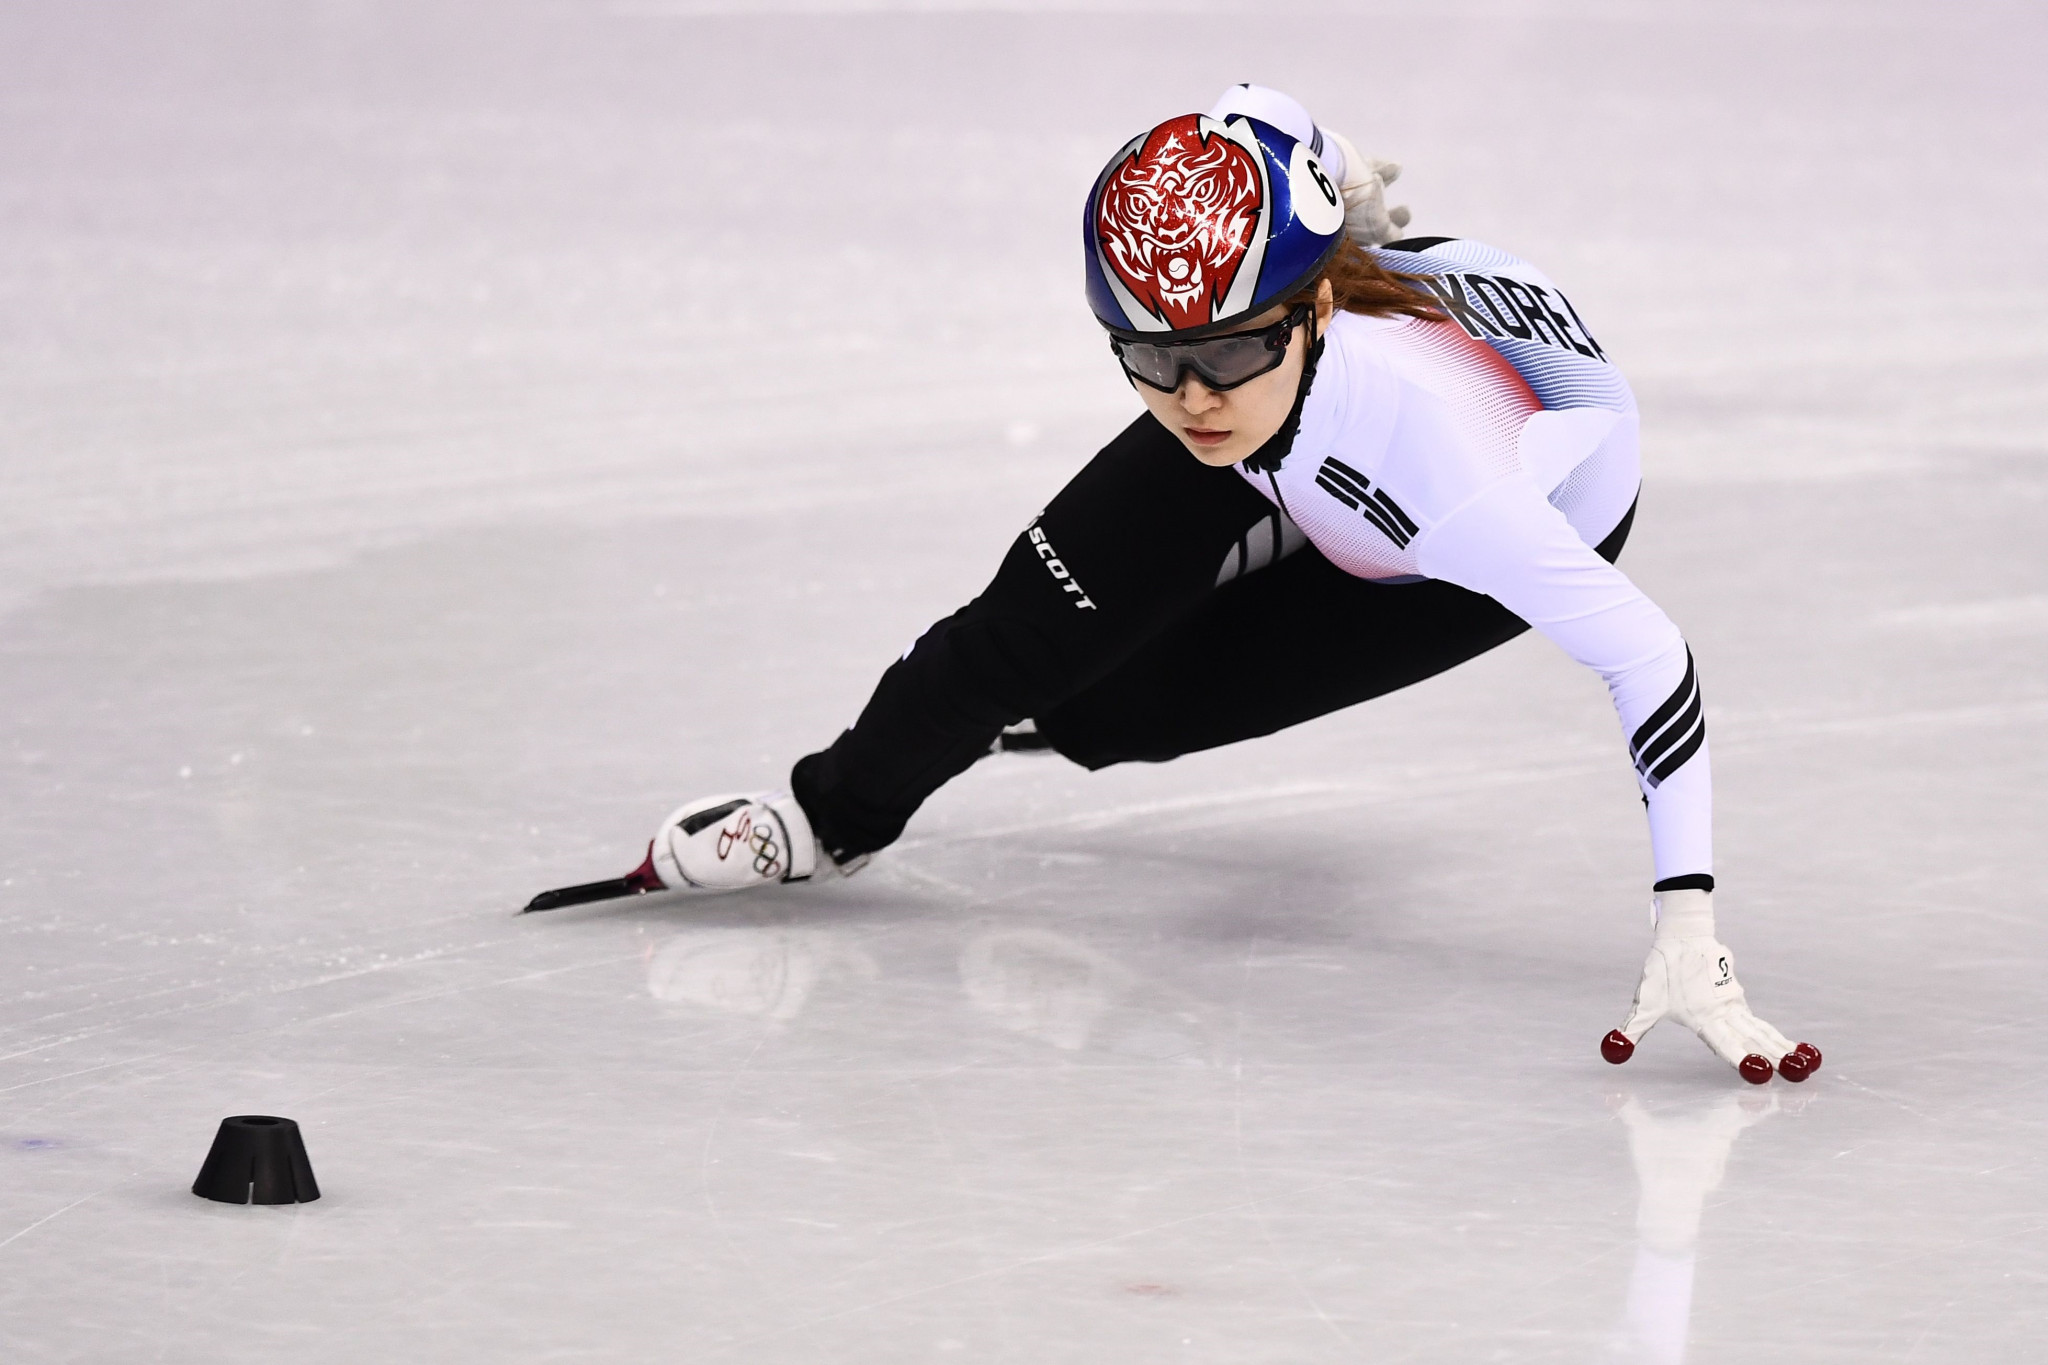 South Korea's Pyeongchang gold medallist Choi Min Jeong was fastest qualifier for the women's 1500m semi-finals in the ISU Short Track World Cup ©Getty Images  